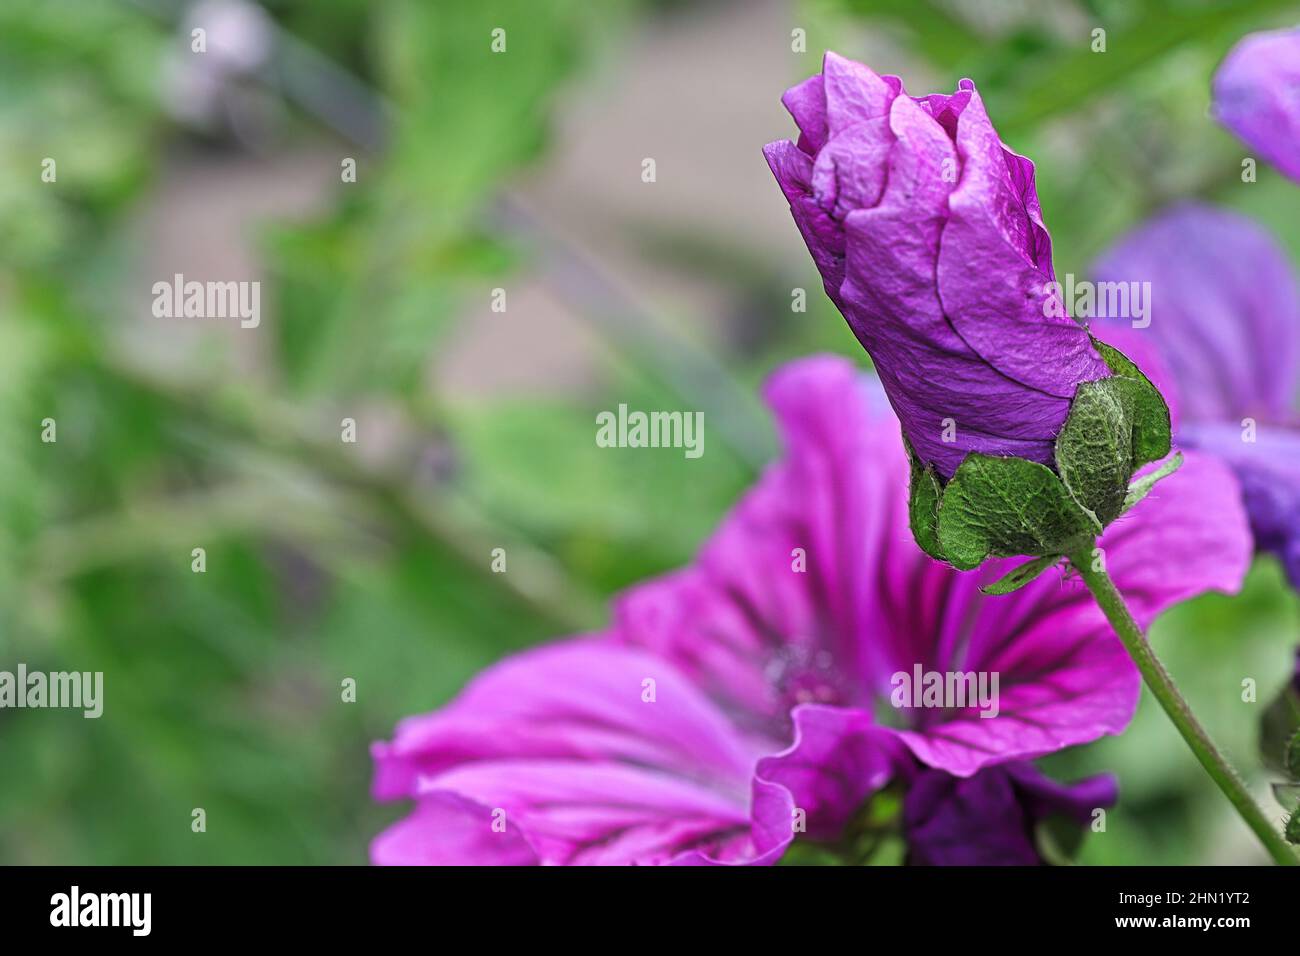 Macro view of the curled purple petals on a mallow plant Stock Photo